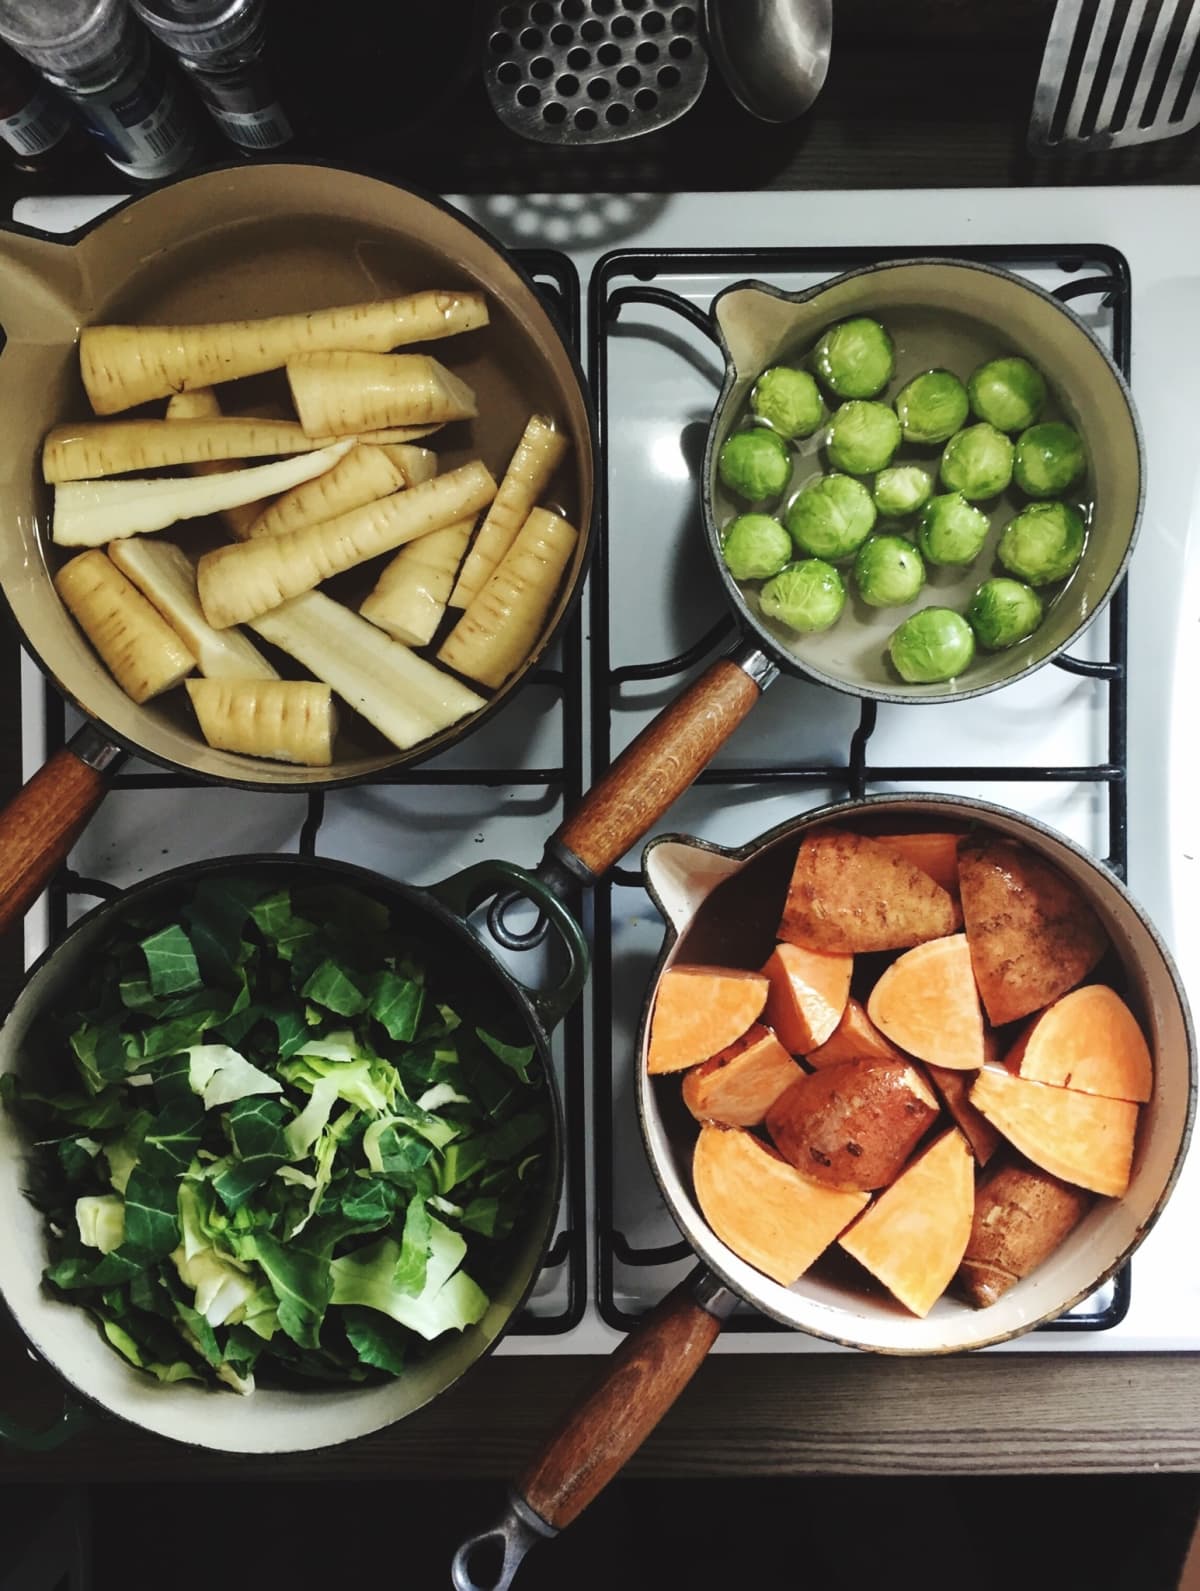 Stovetop area with vegetables like Brussels sprouts cooking in pots